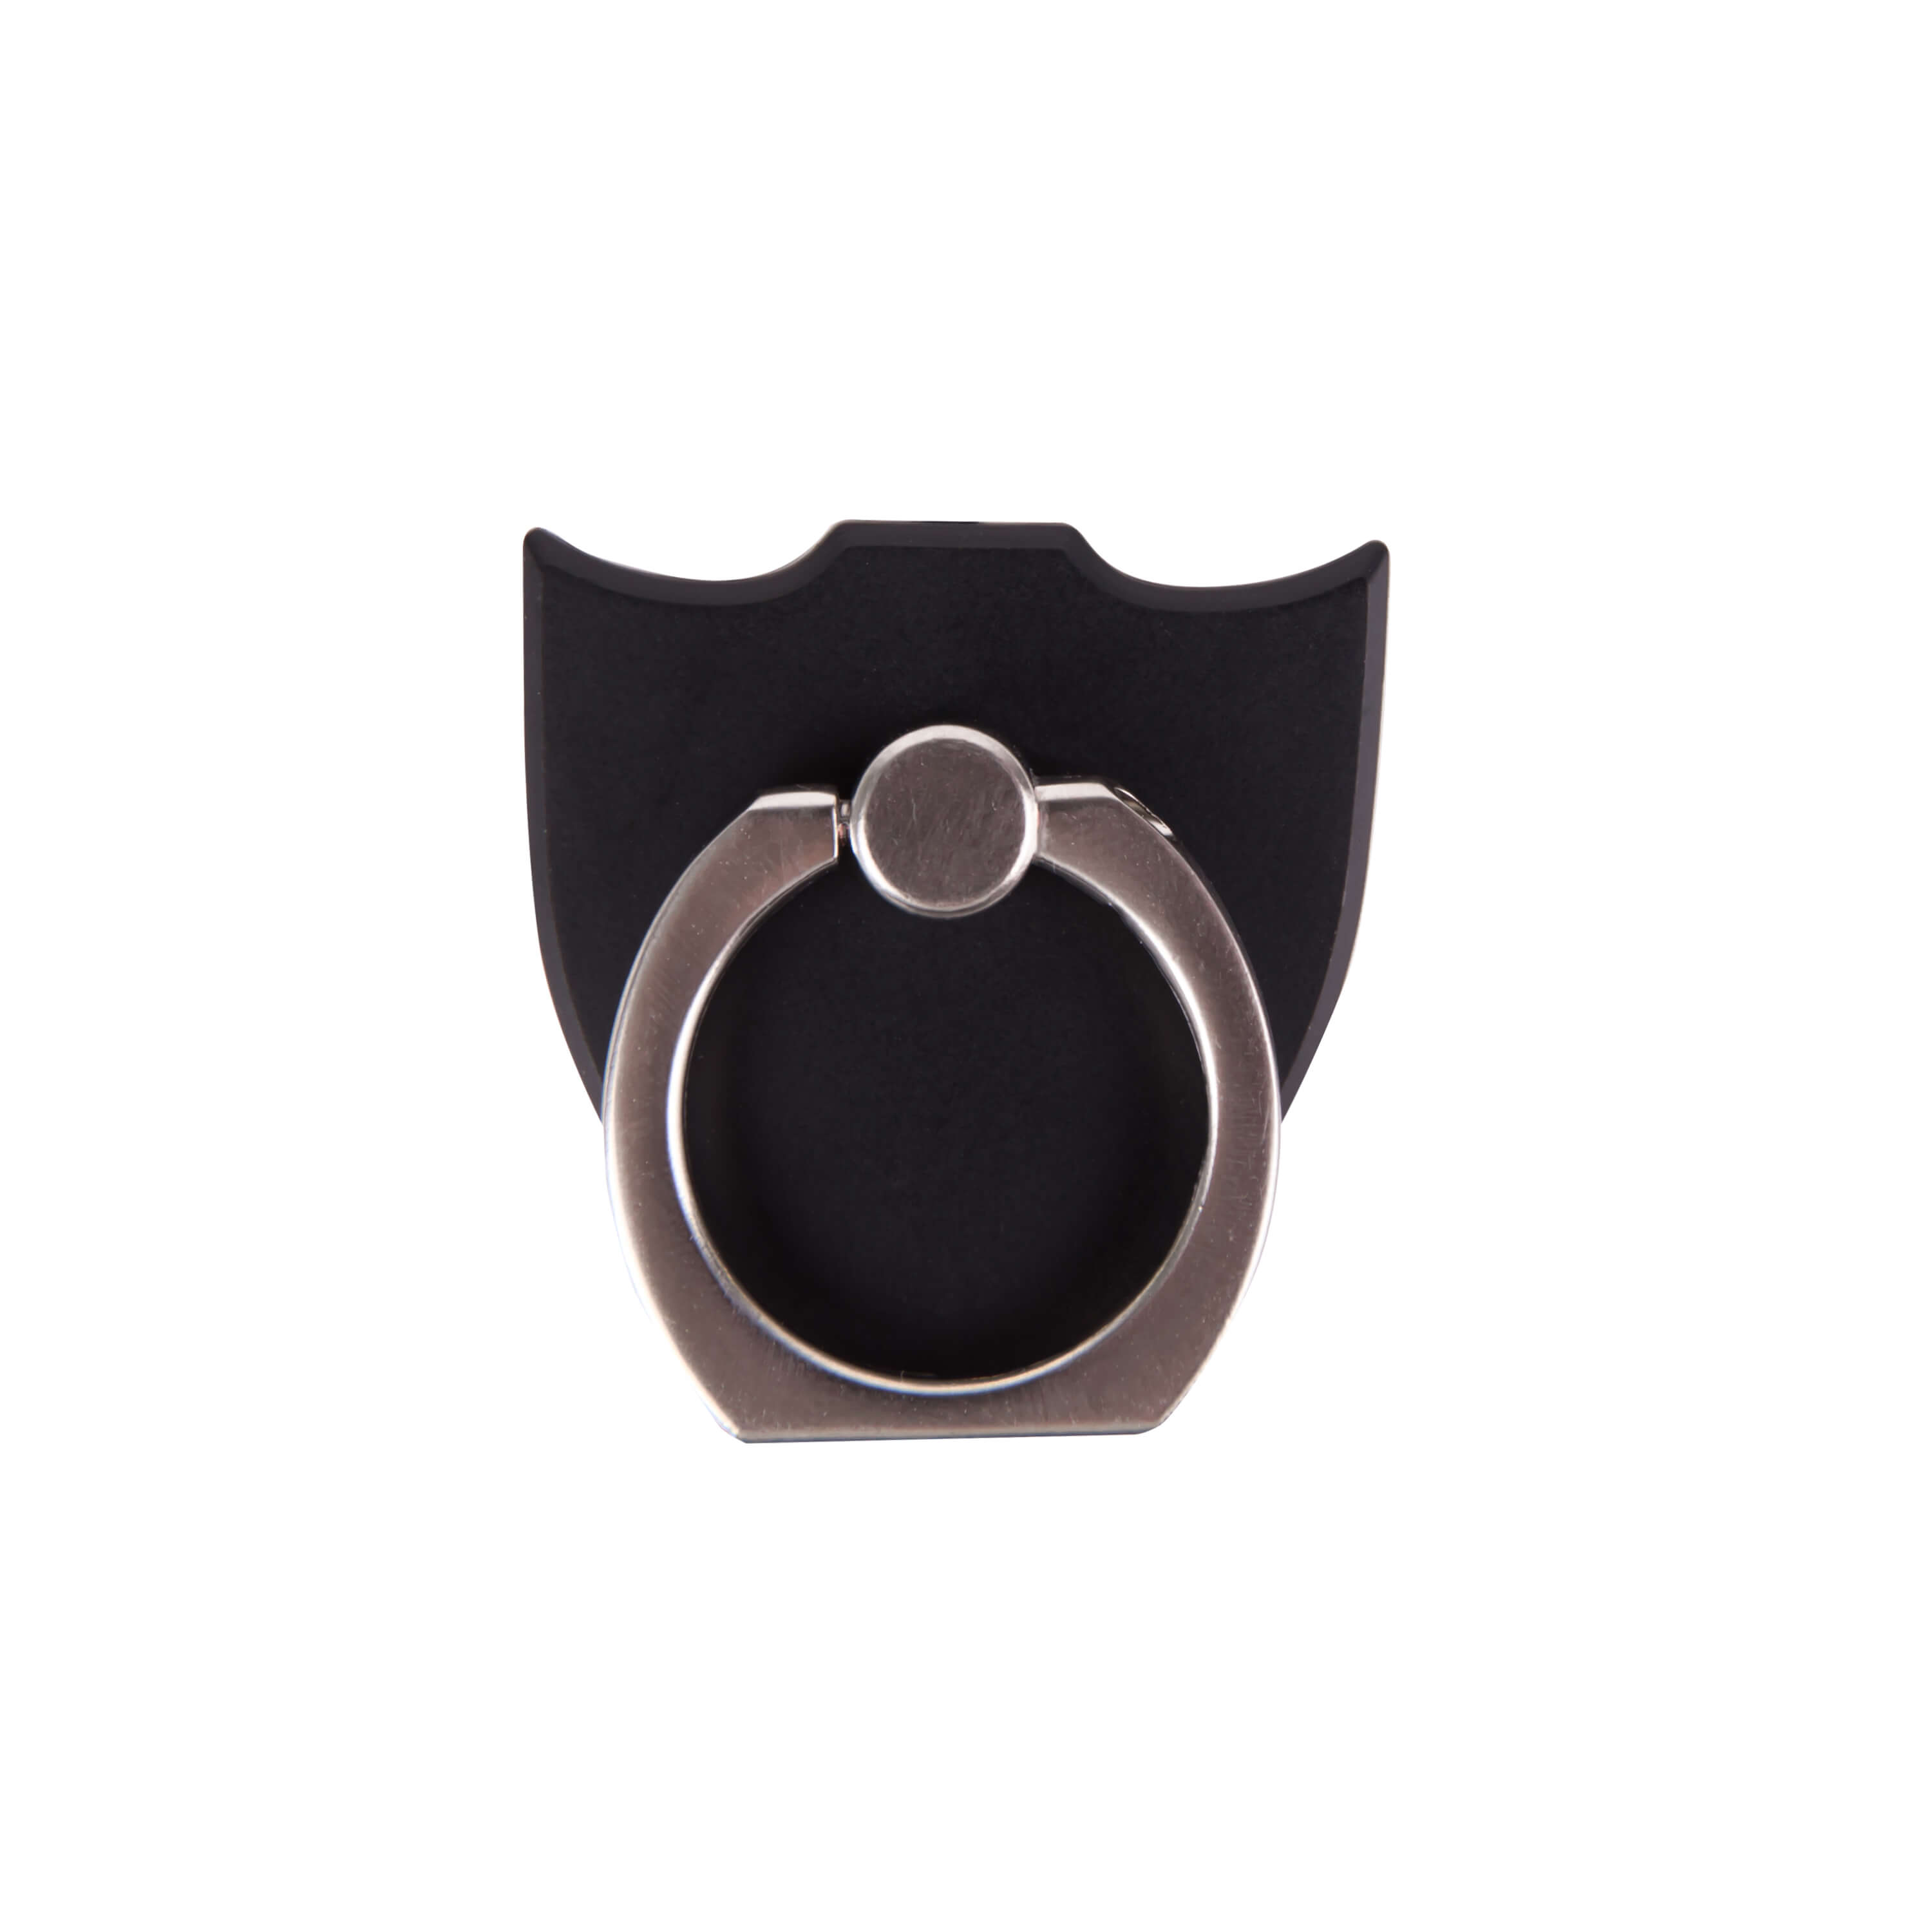 Finger ring shield black with stand function